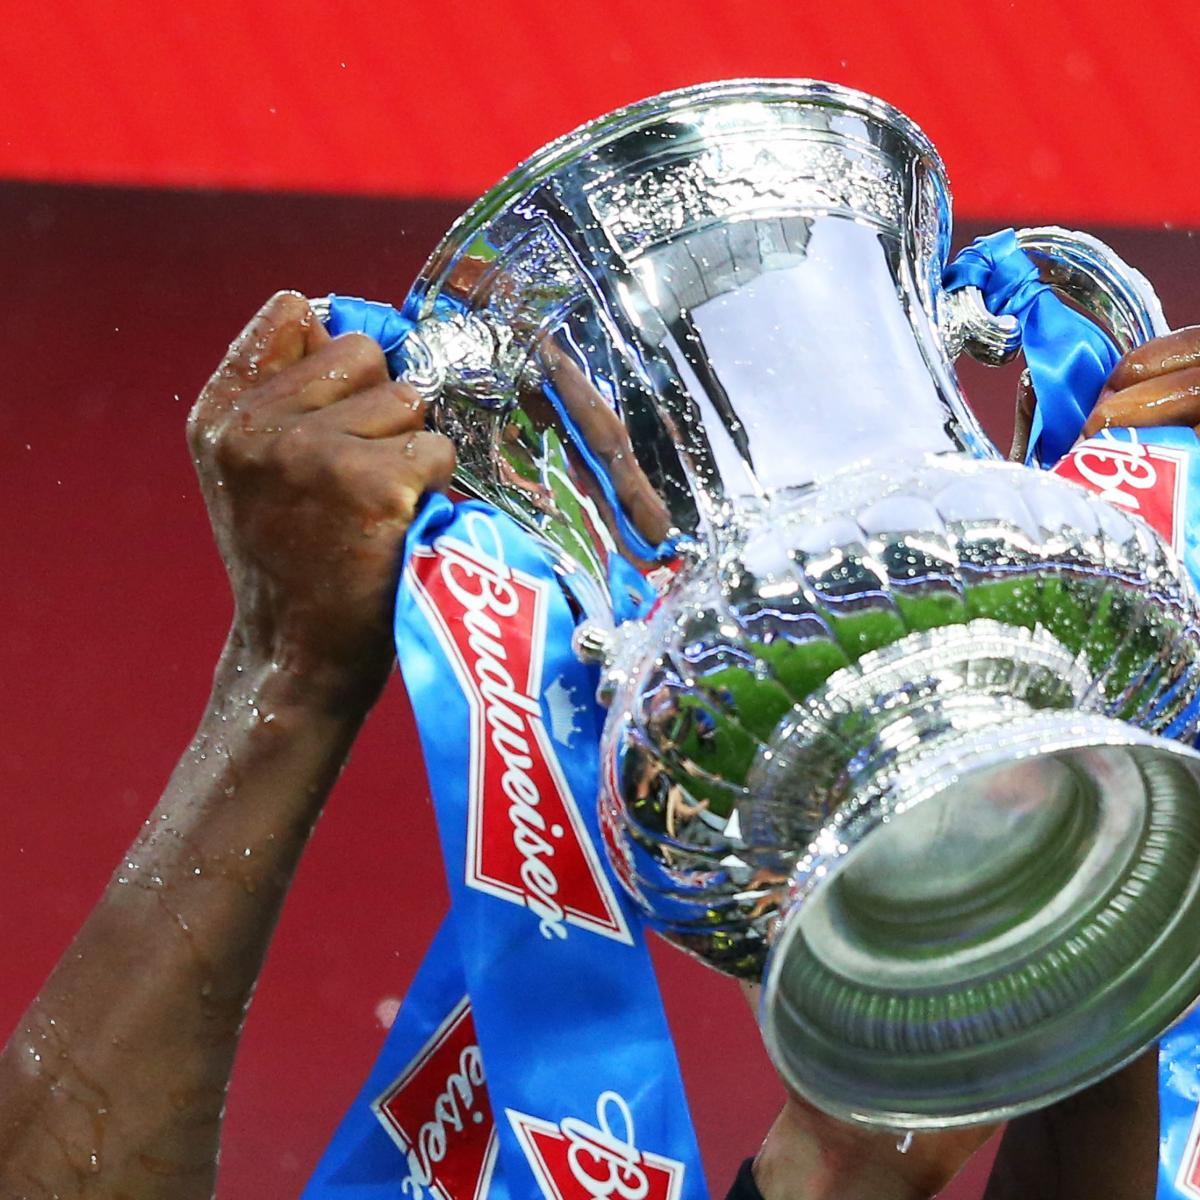 FA Cup Draw 2014 Results List of Fixtures and Dates for Semifinals